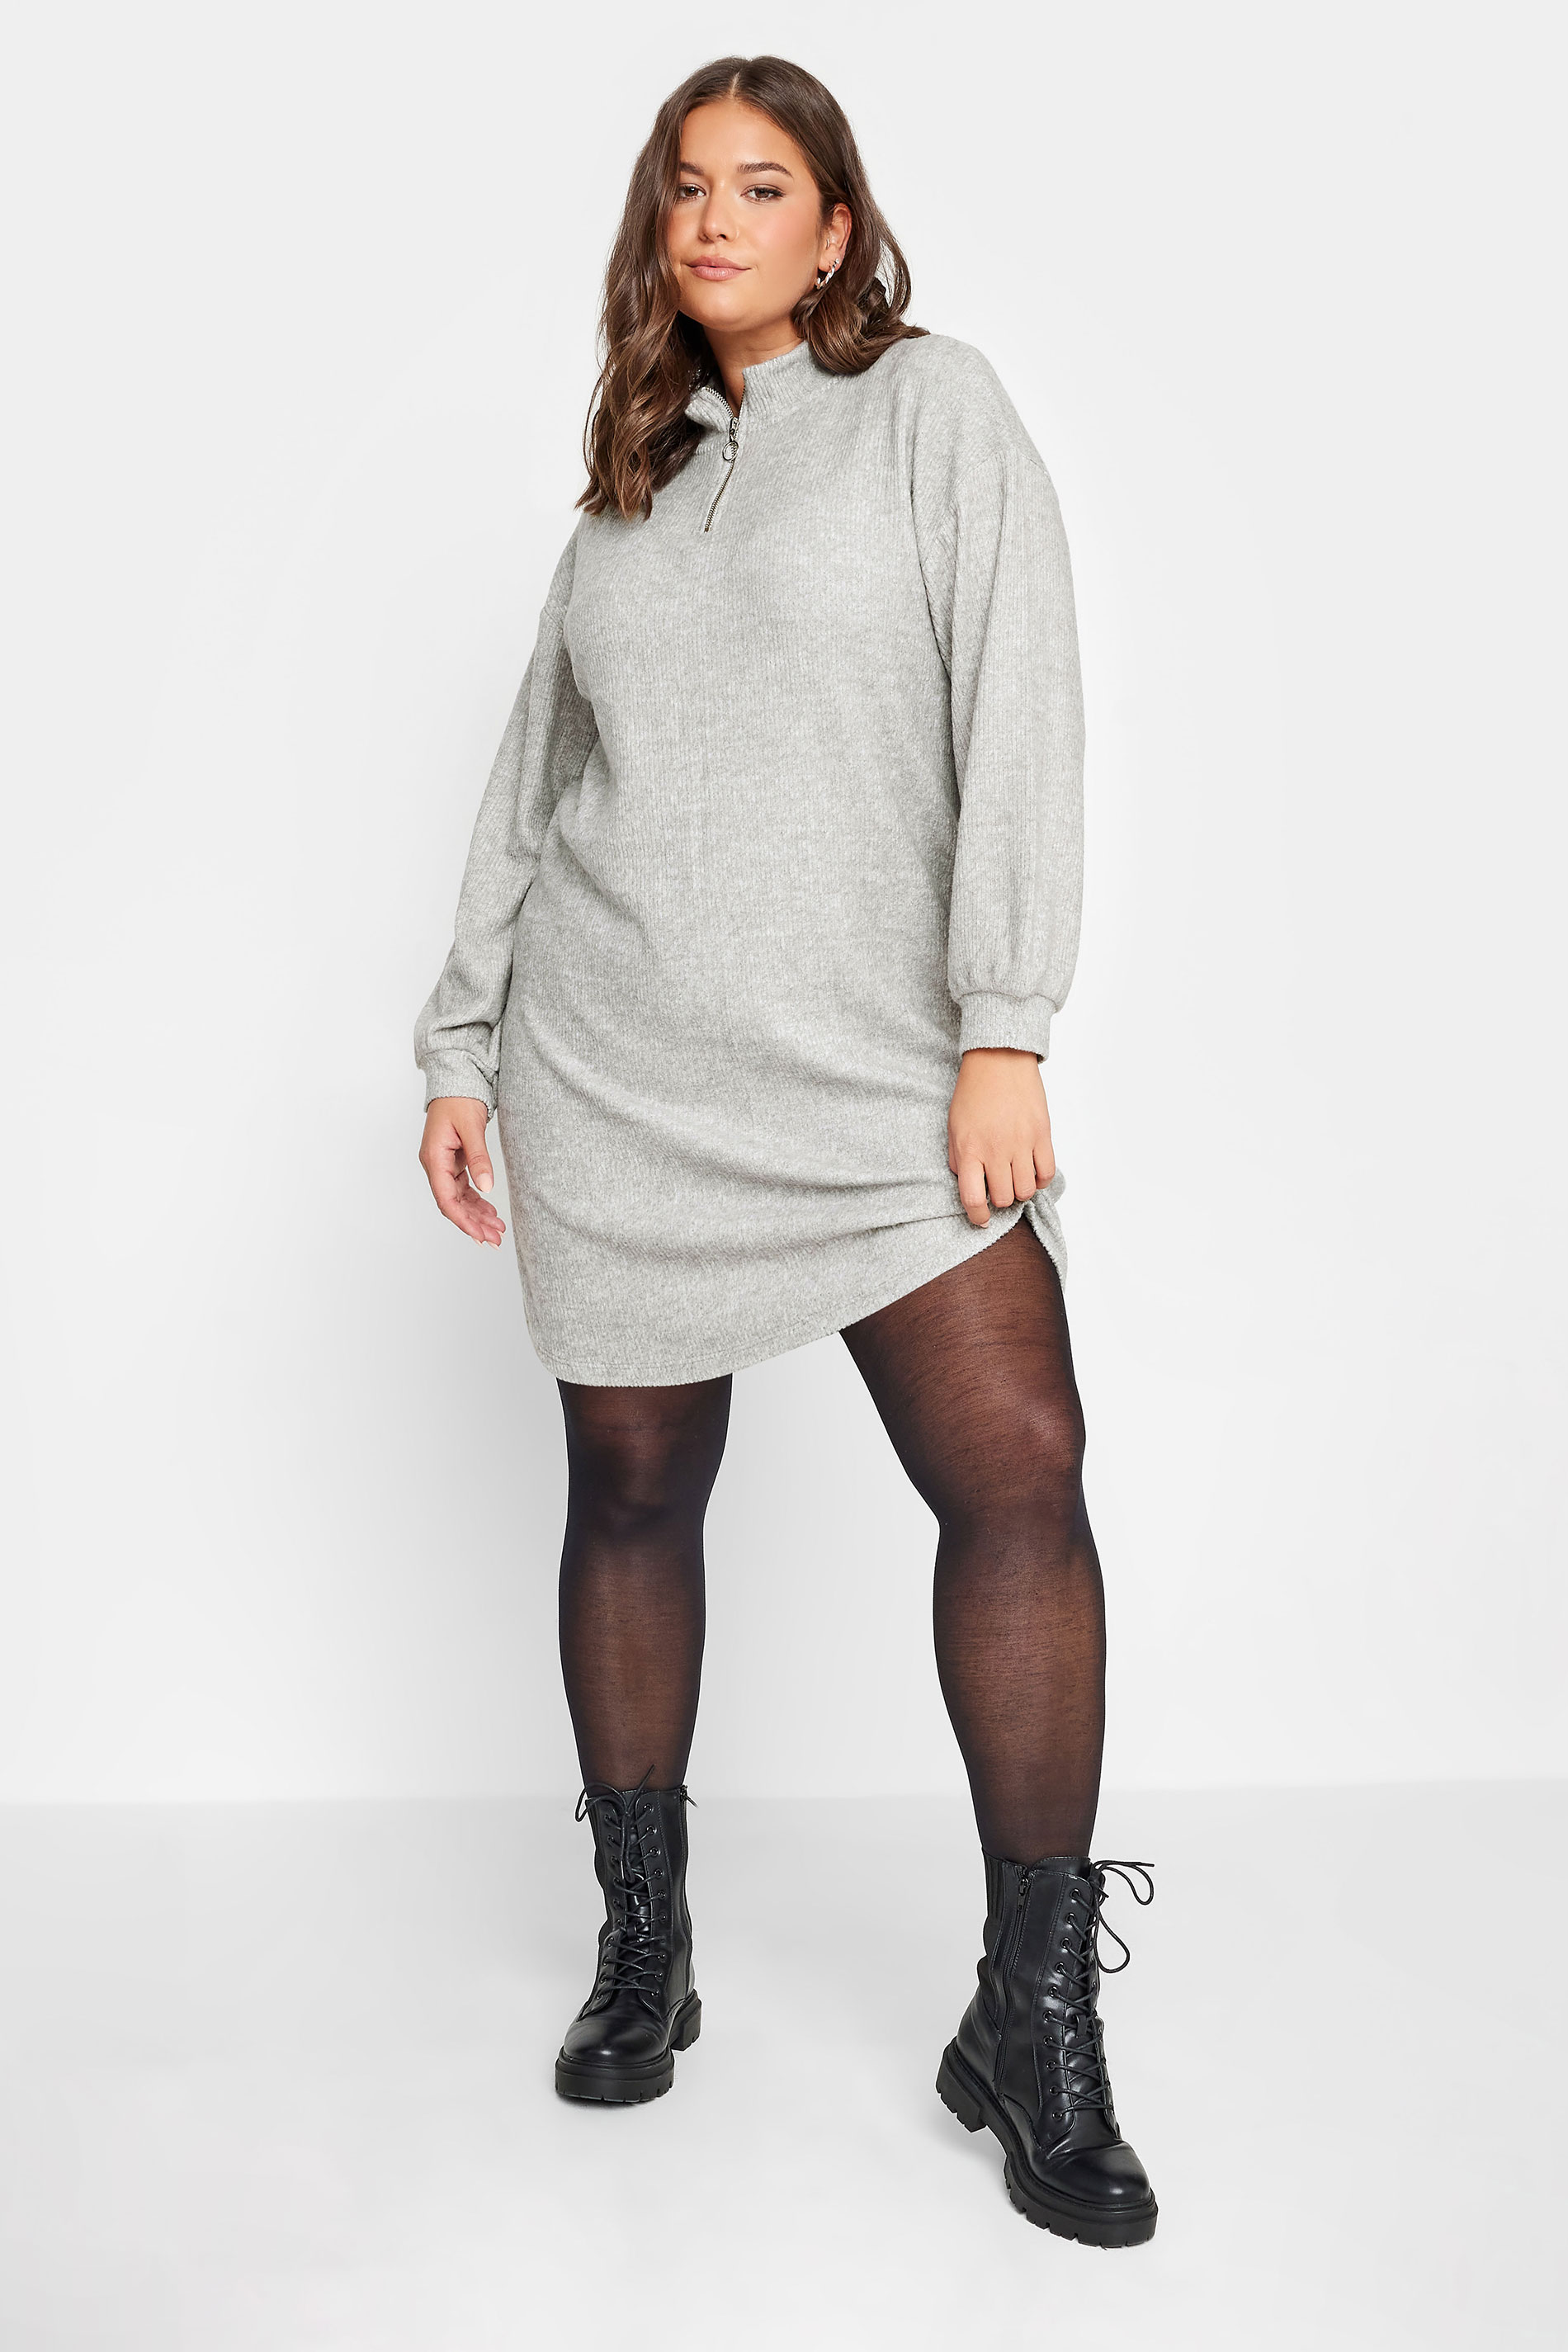 YOURS Plus Size Grey Soft Touch Zip Neck Jumper Dress | Yours Clothing 1